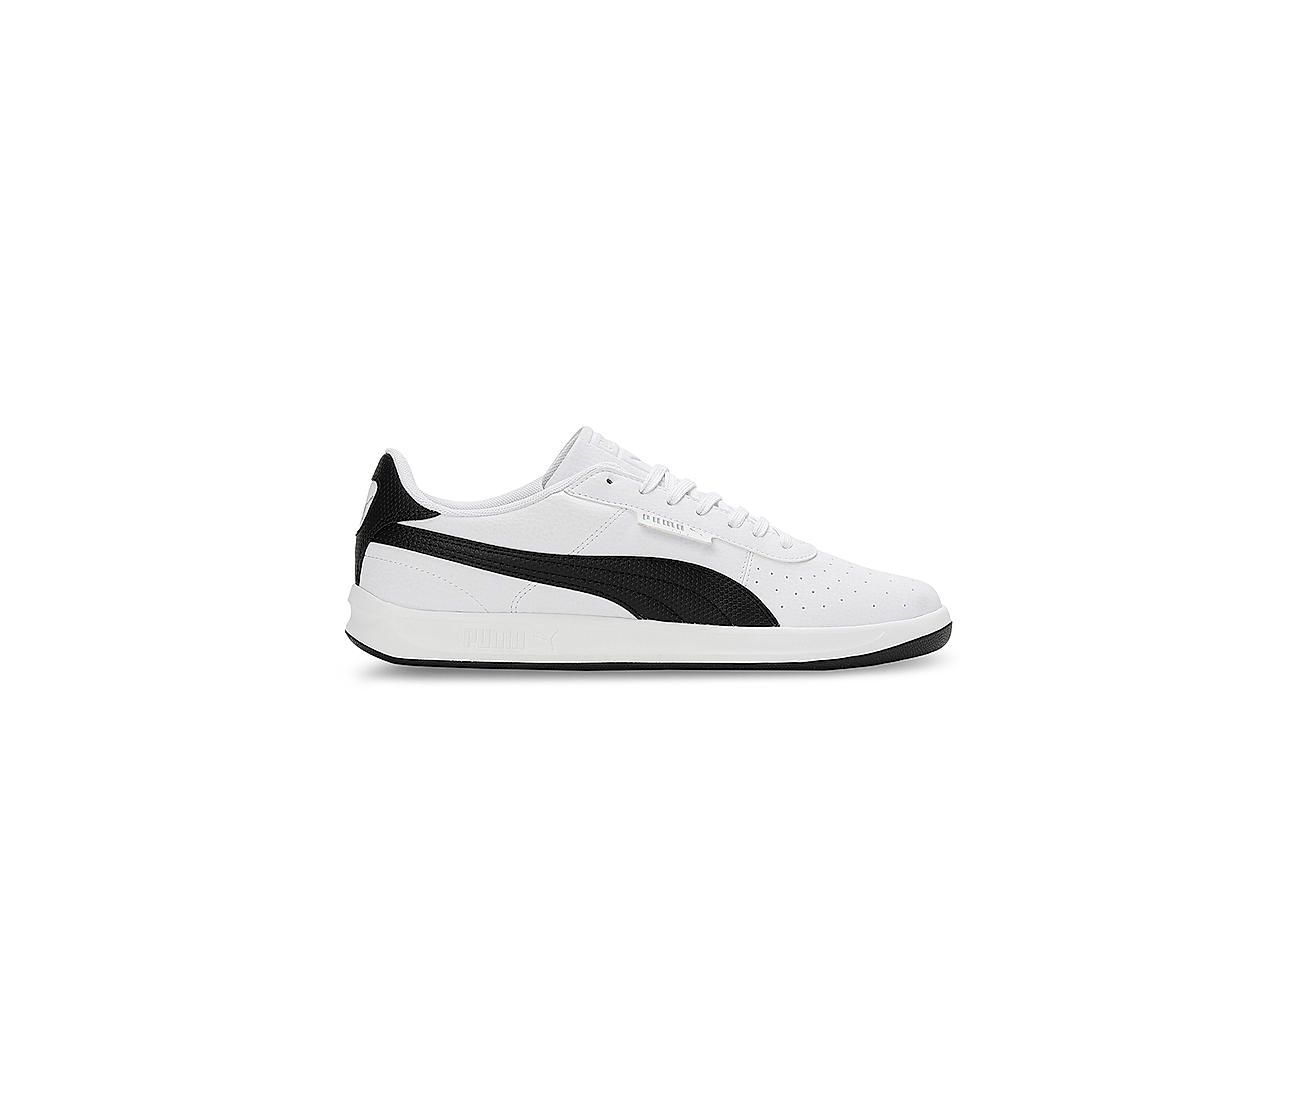 asian Future-04 laceless sports shoes for men | Latest Stylish Casual  sneakers for men without laces | running shoes for boys | Slip on black  shoes for running, walking, gym, trekking &